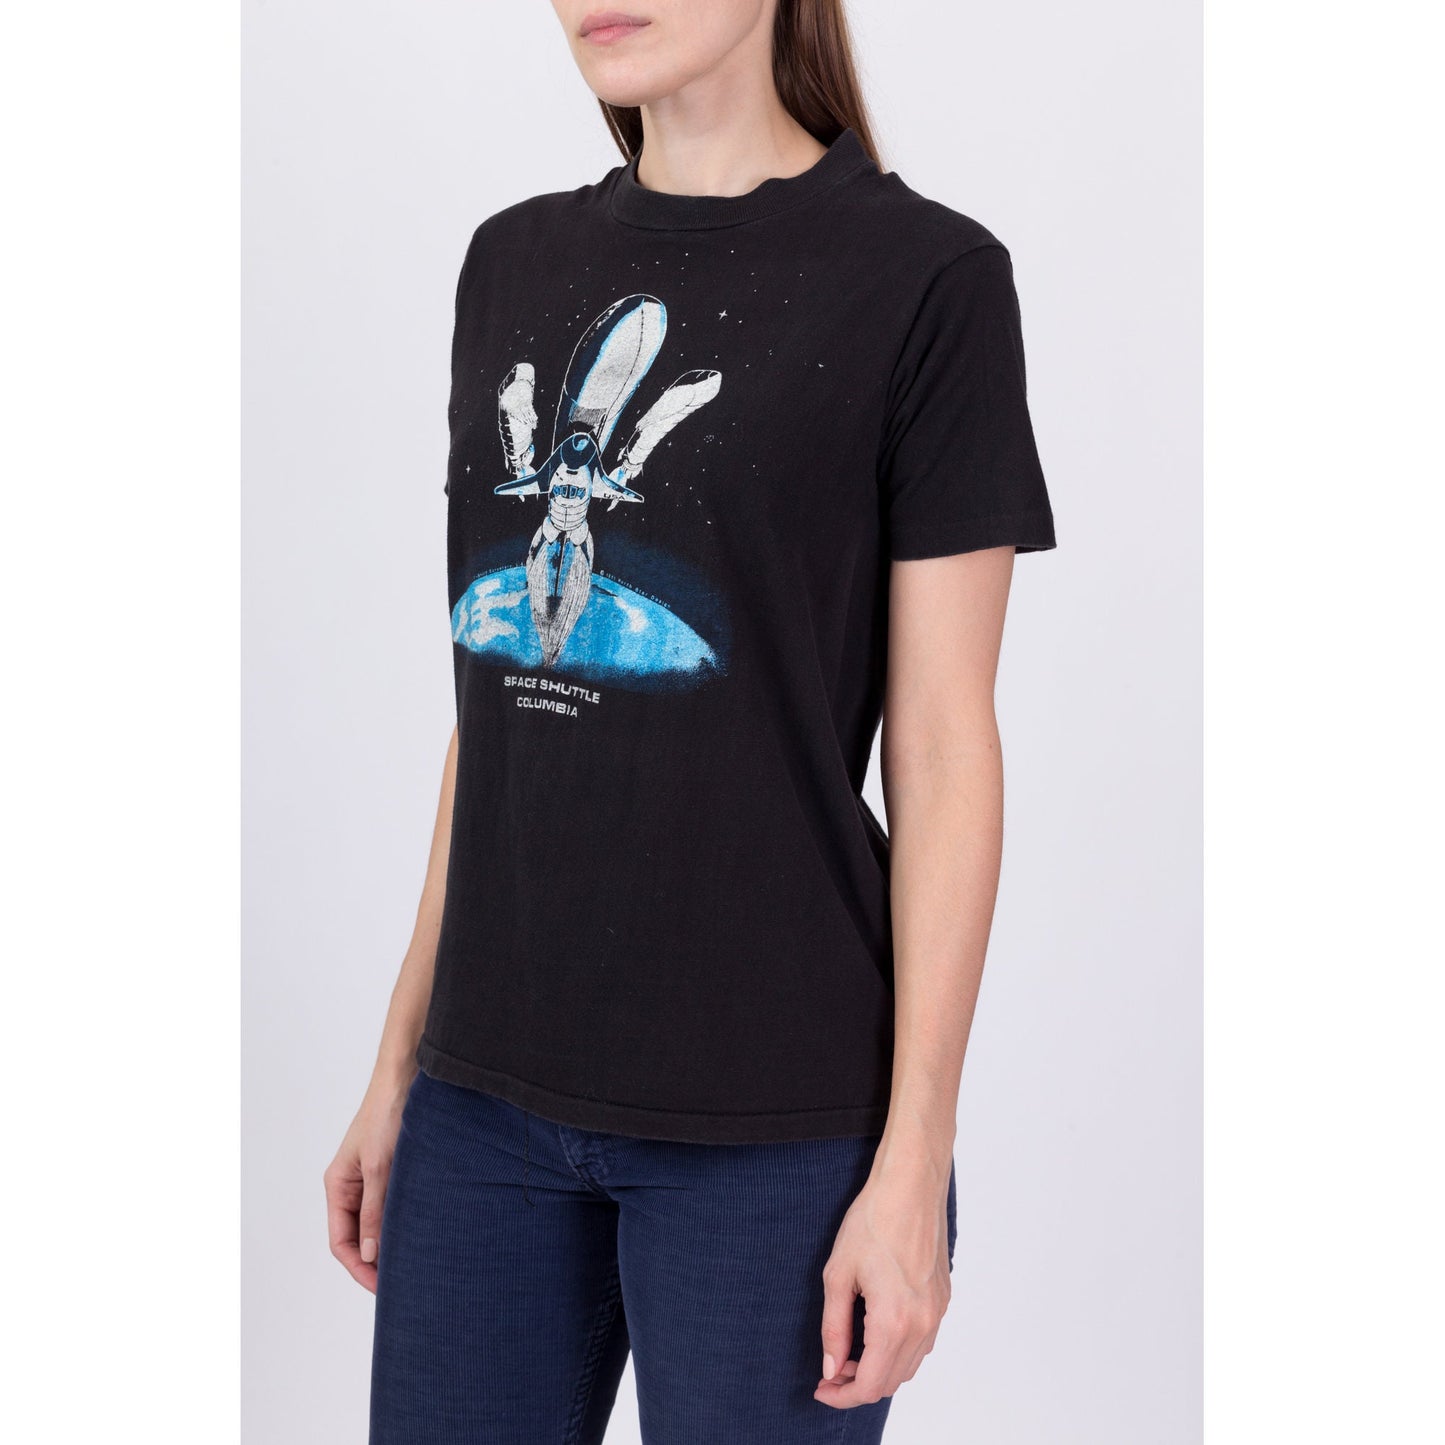 1981 Columbia Space Shuttle T Shirt - Unisex Small 